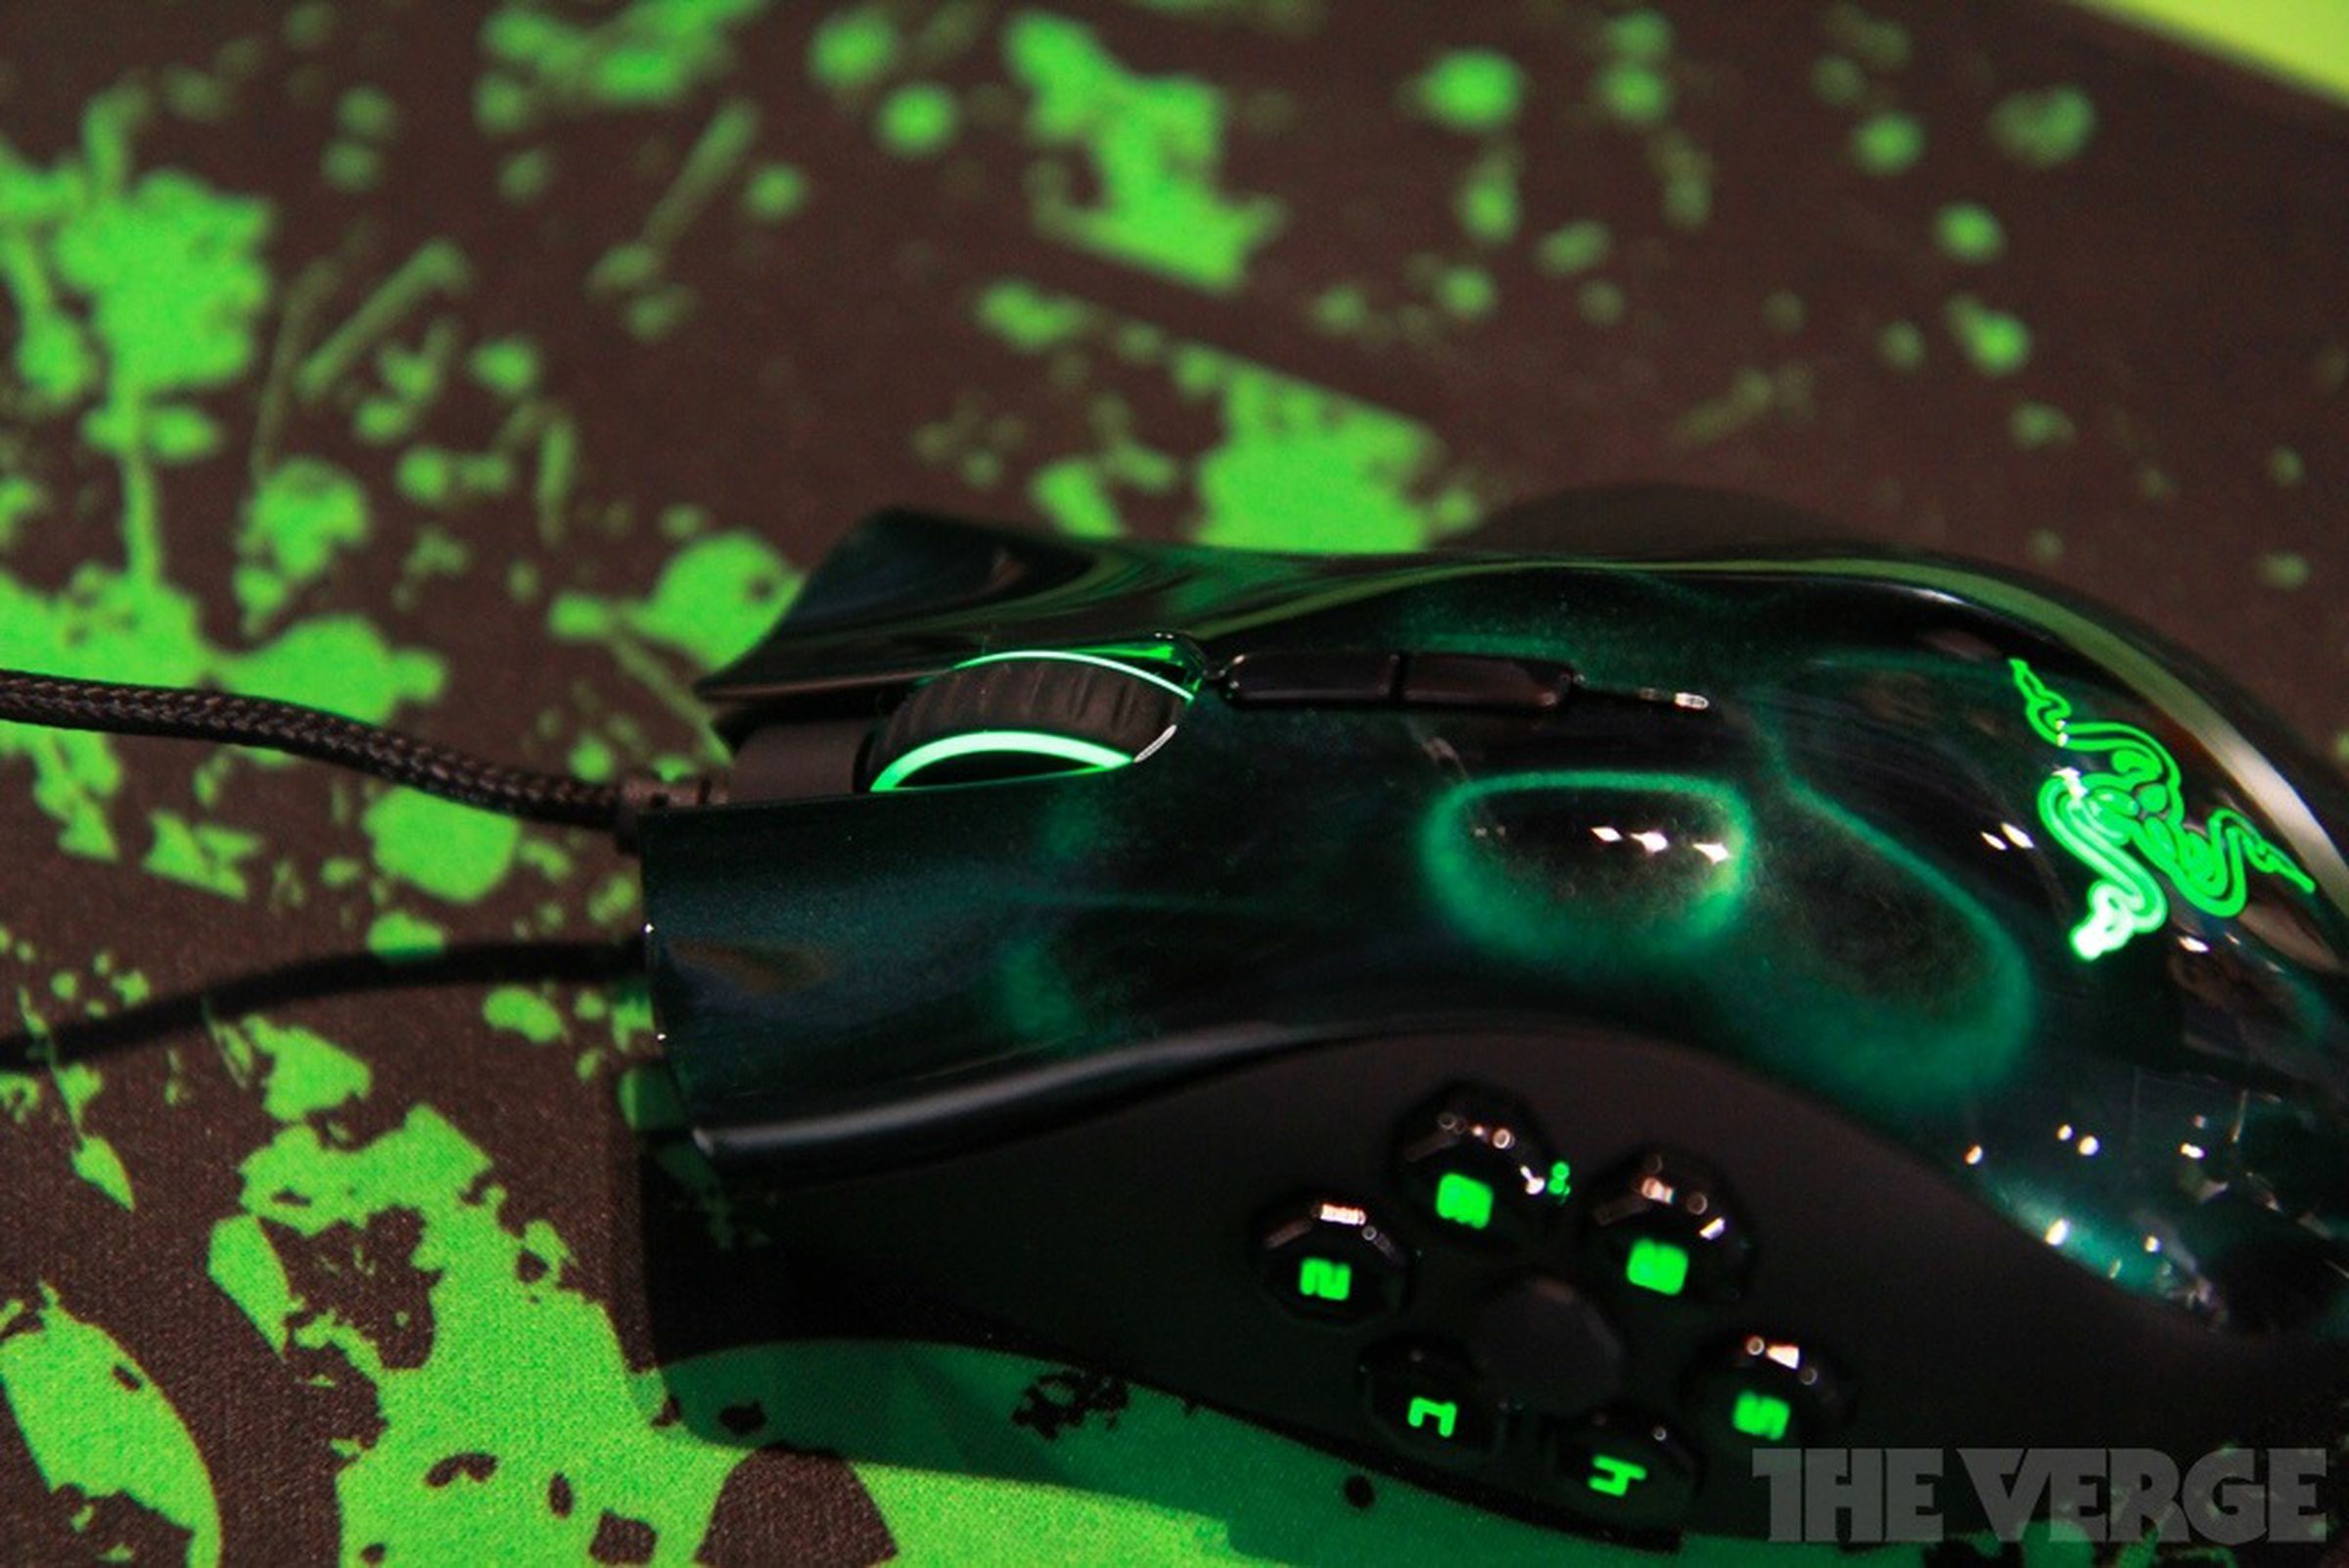 Razer Naga Hex gaming mouse hands-on pictures